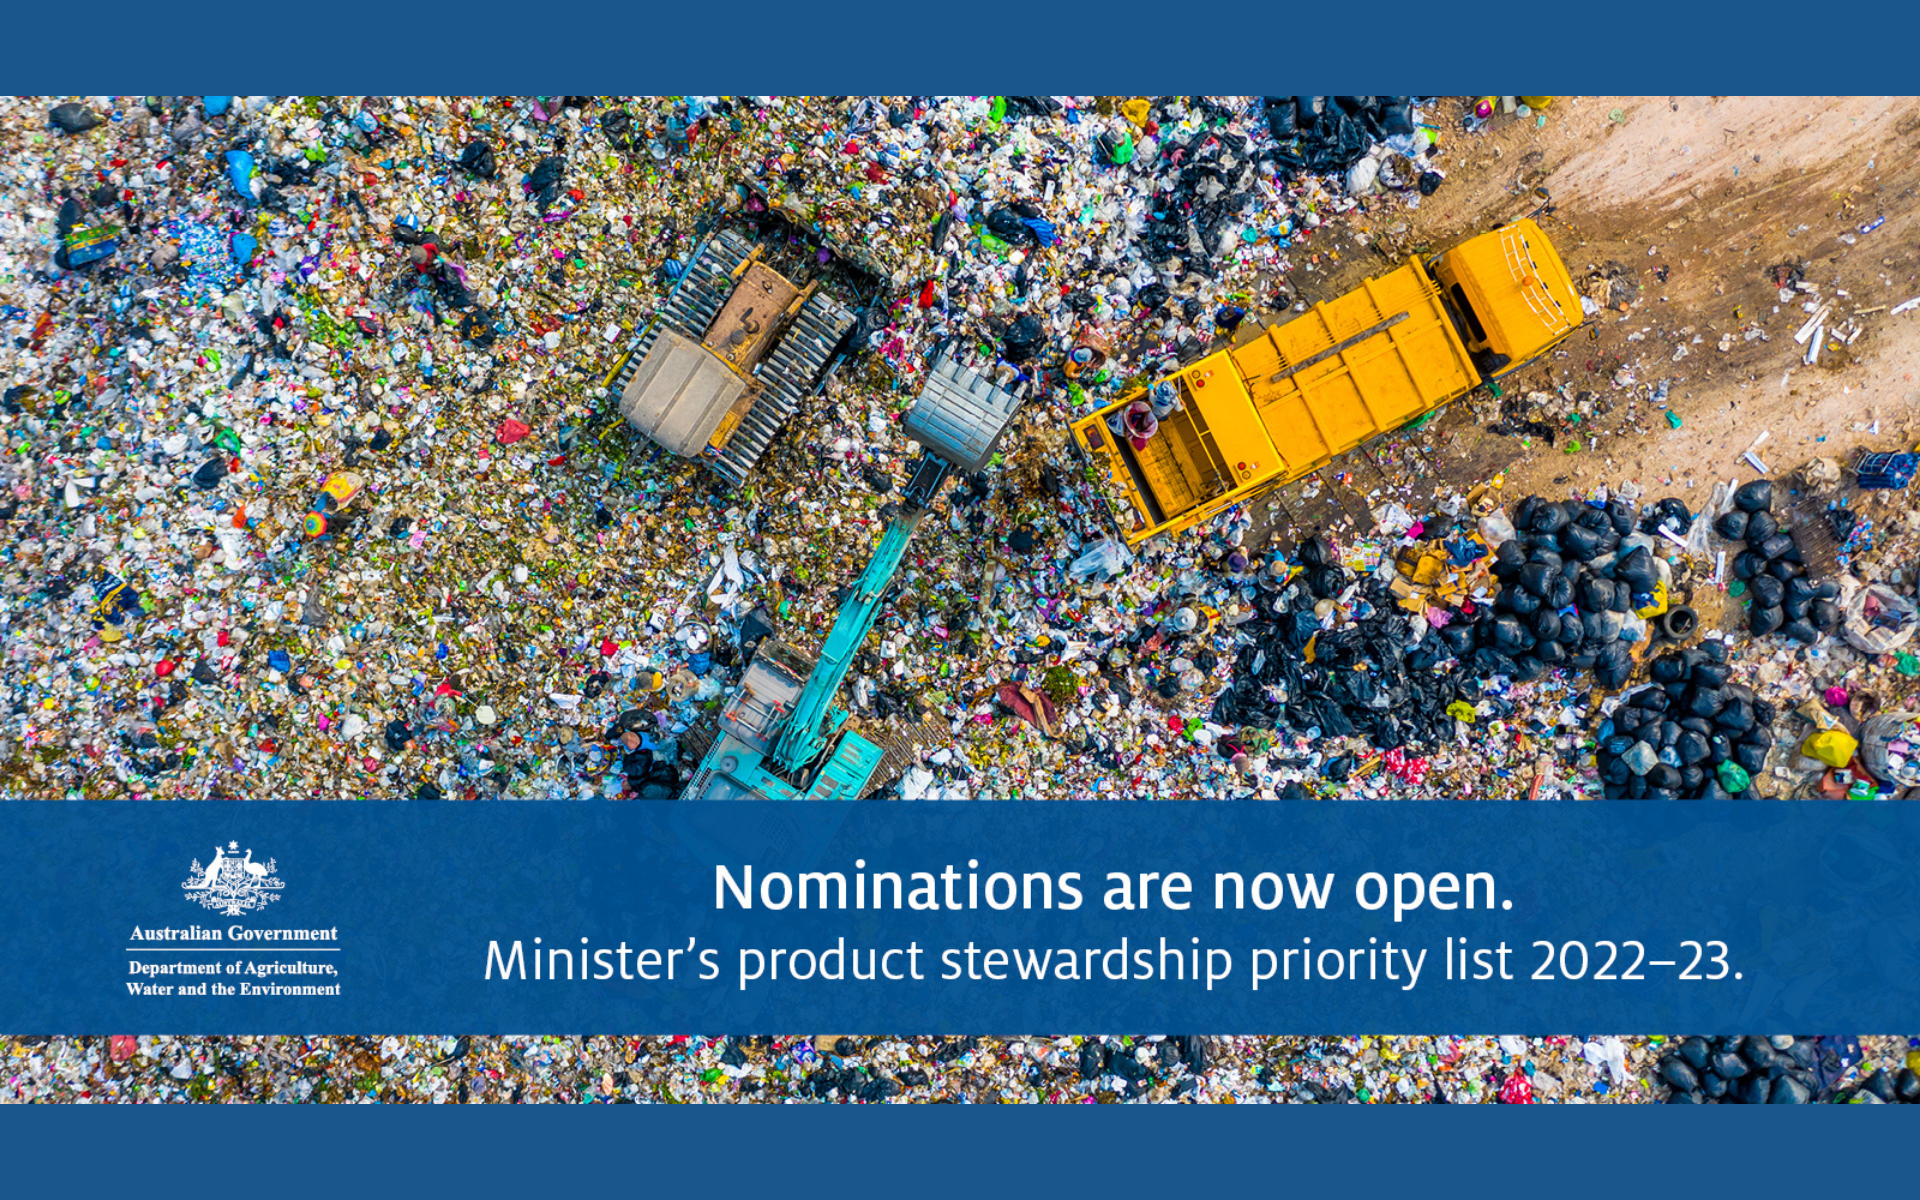 Have Your Say on the Minister’s Product Stewardship Priority List!